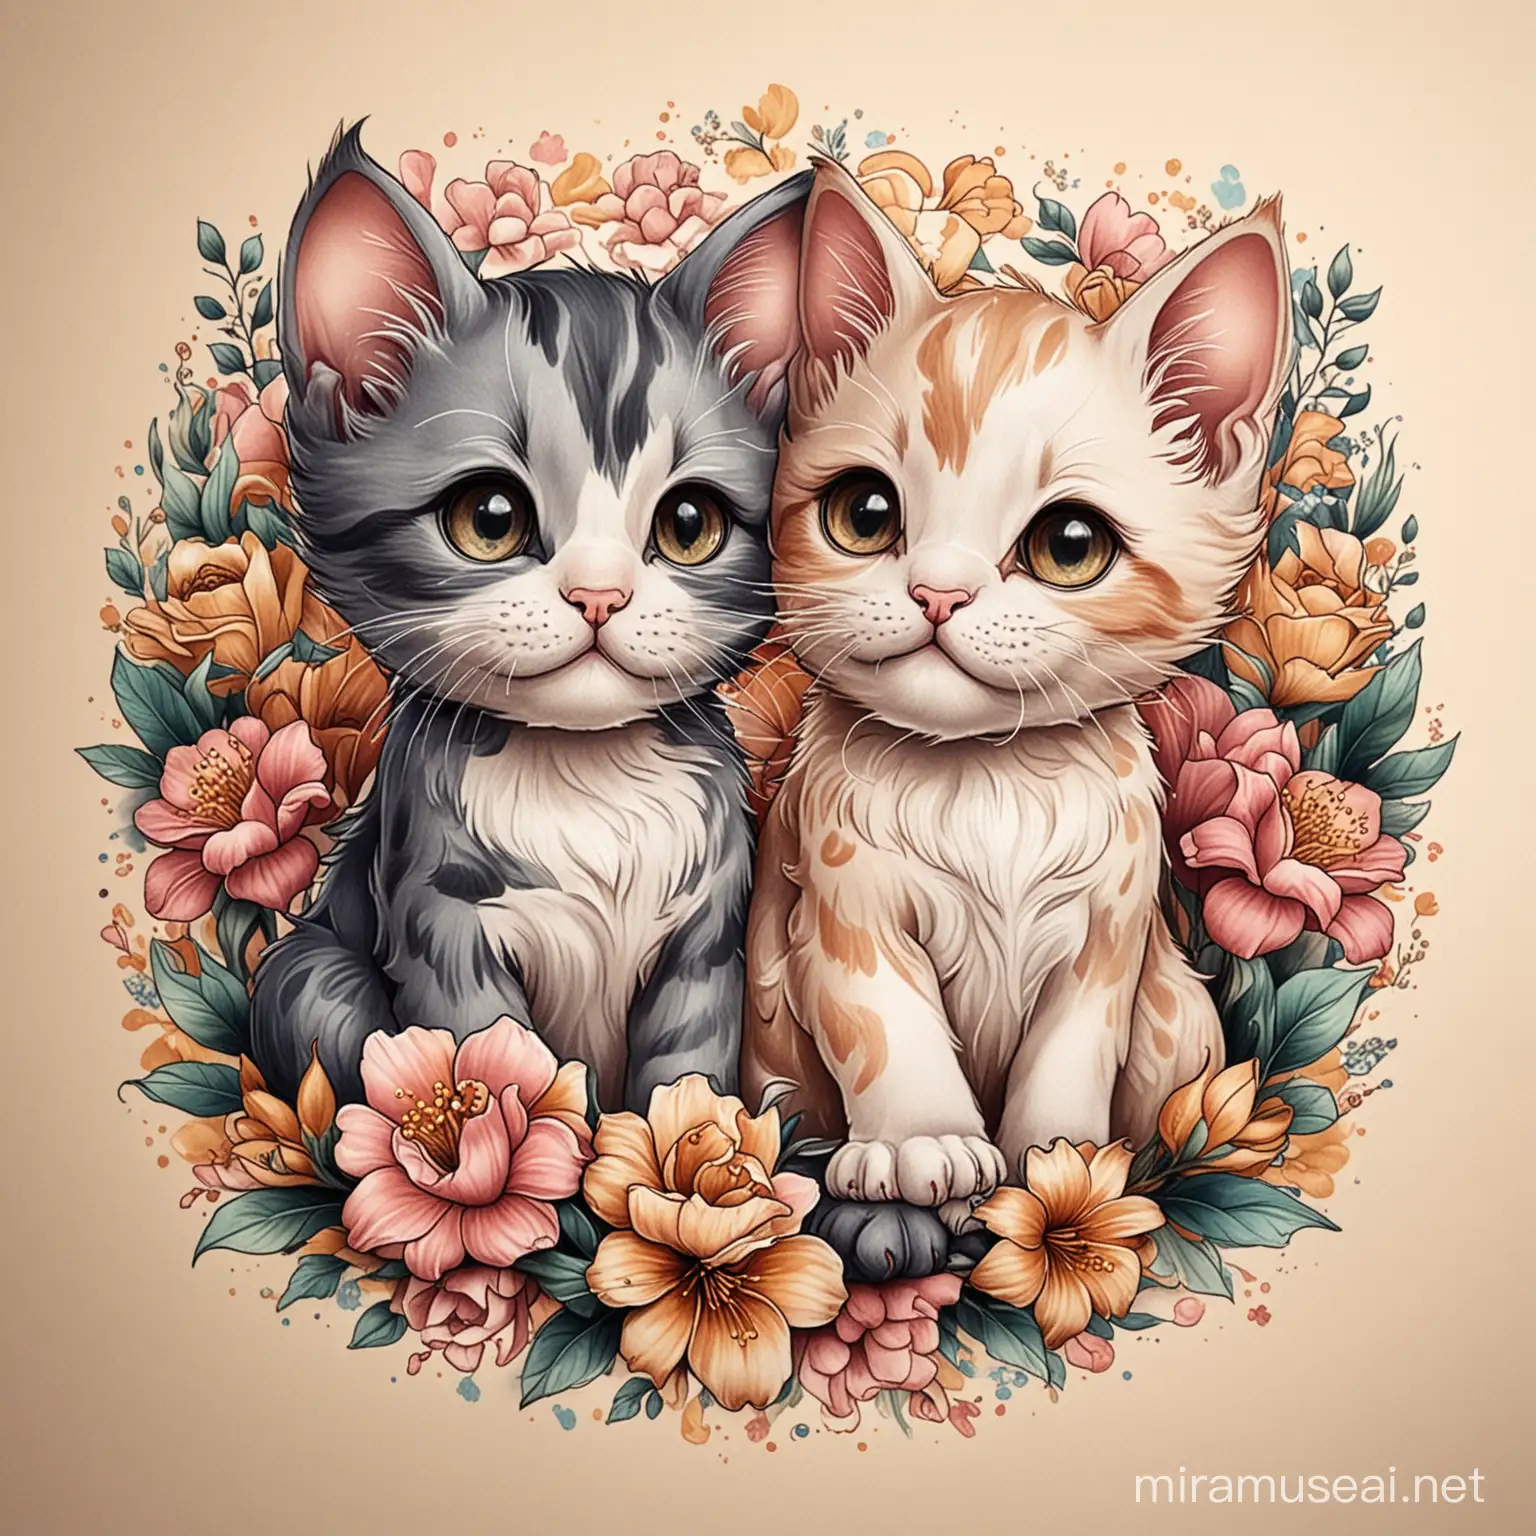 Neotraditional Style Tattoo Design Playful Kittens Amidst Floral Delight